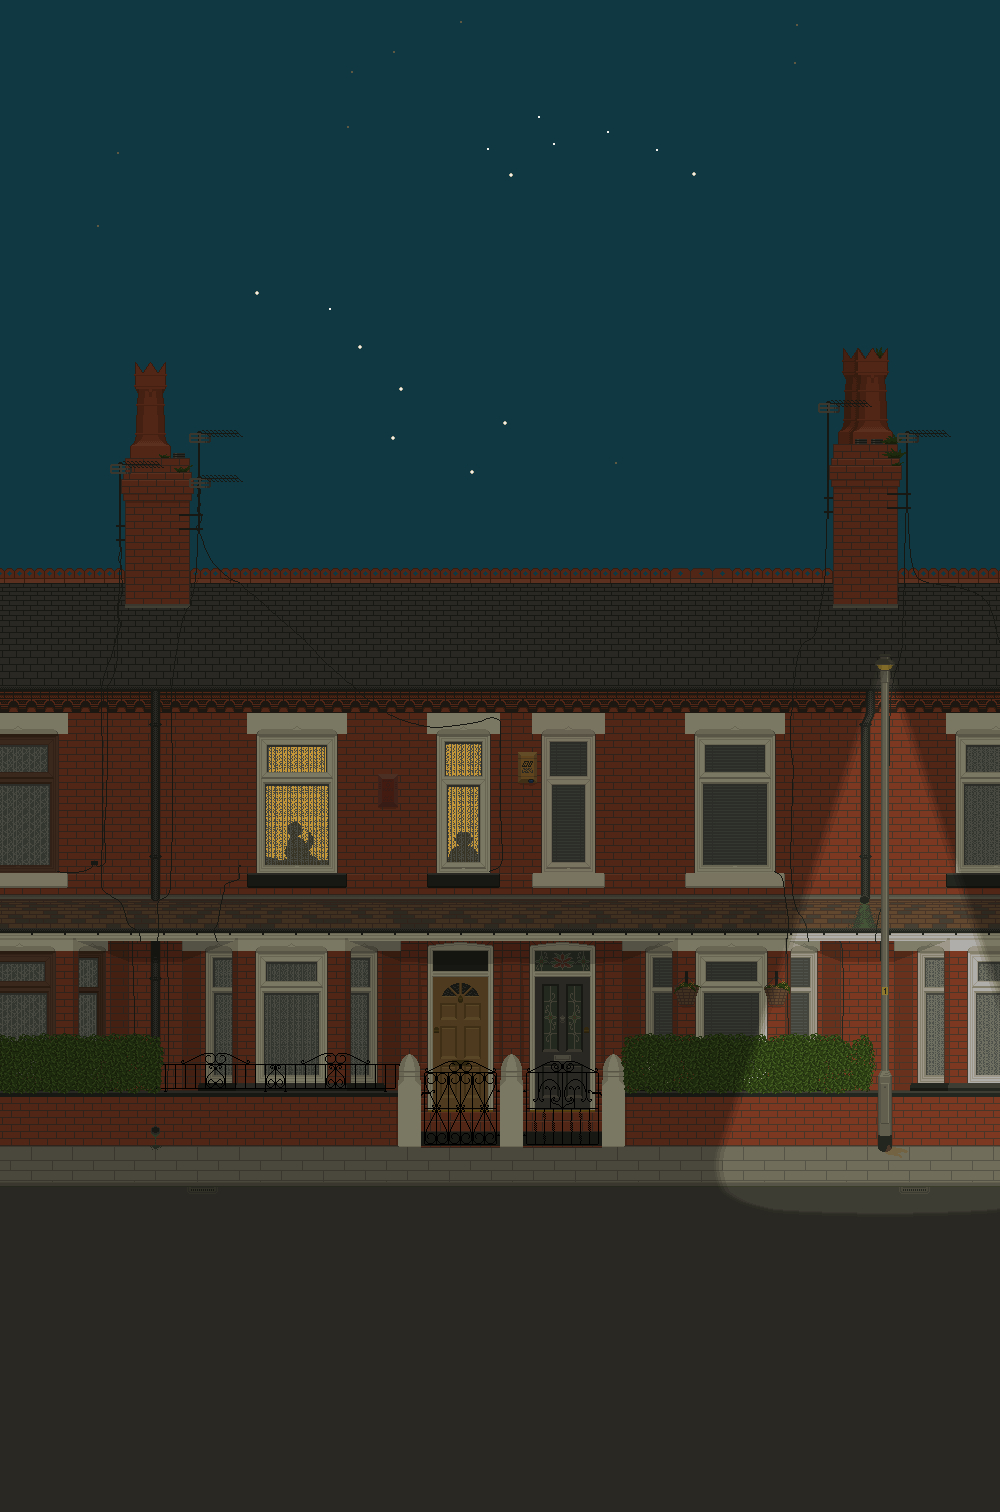 A pixel art illustration based on a terraced house in Salford.